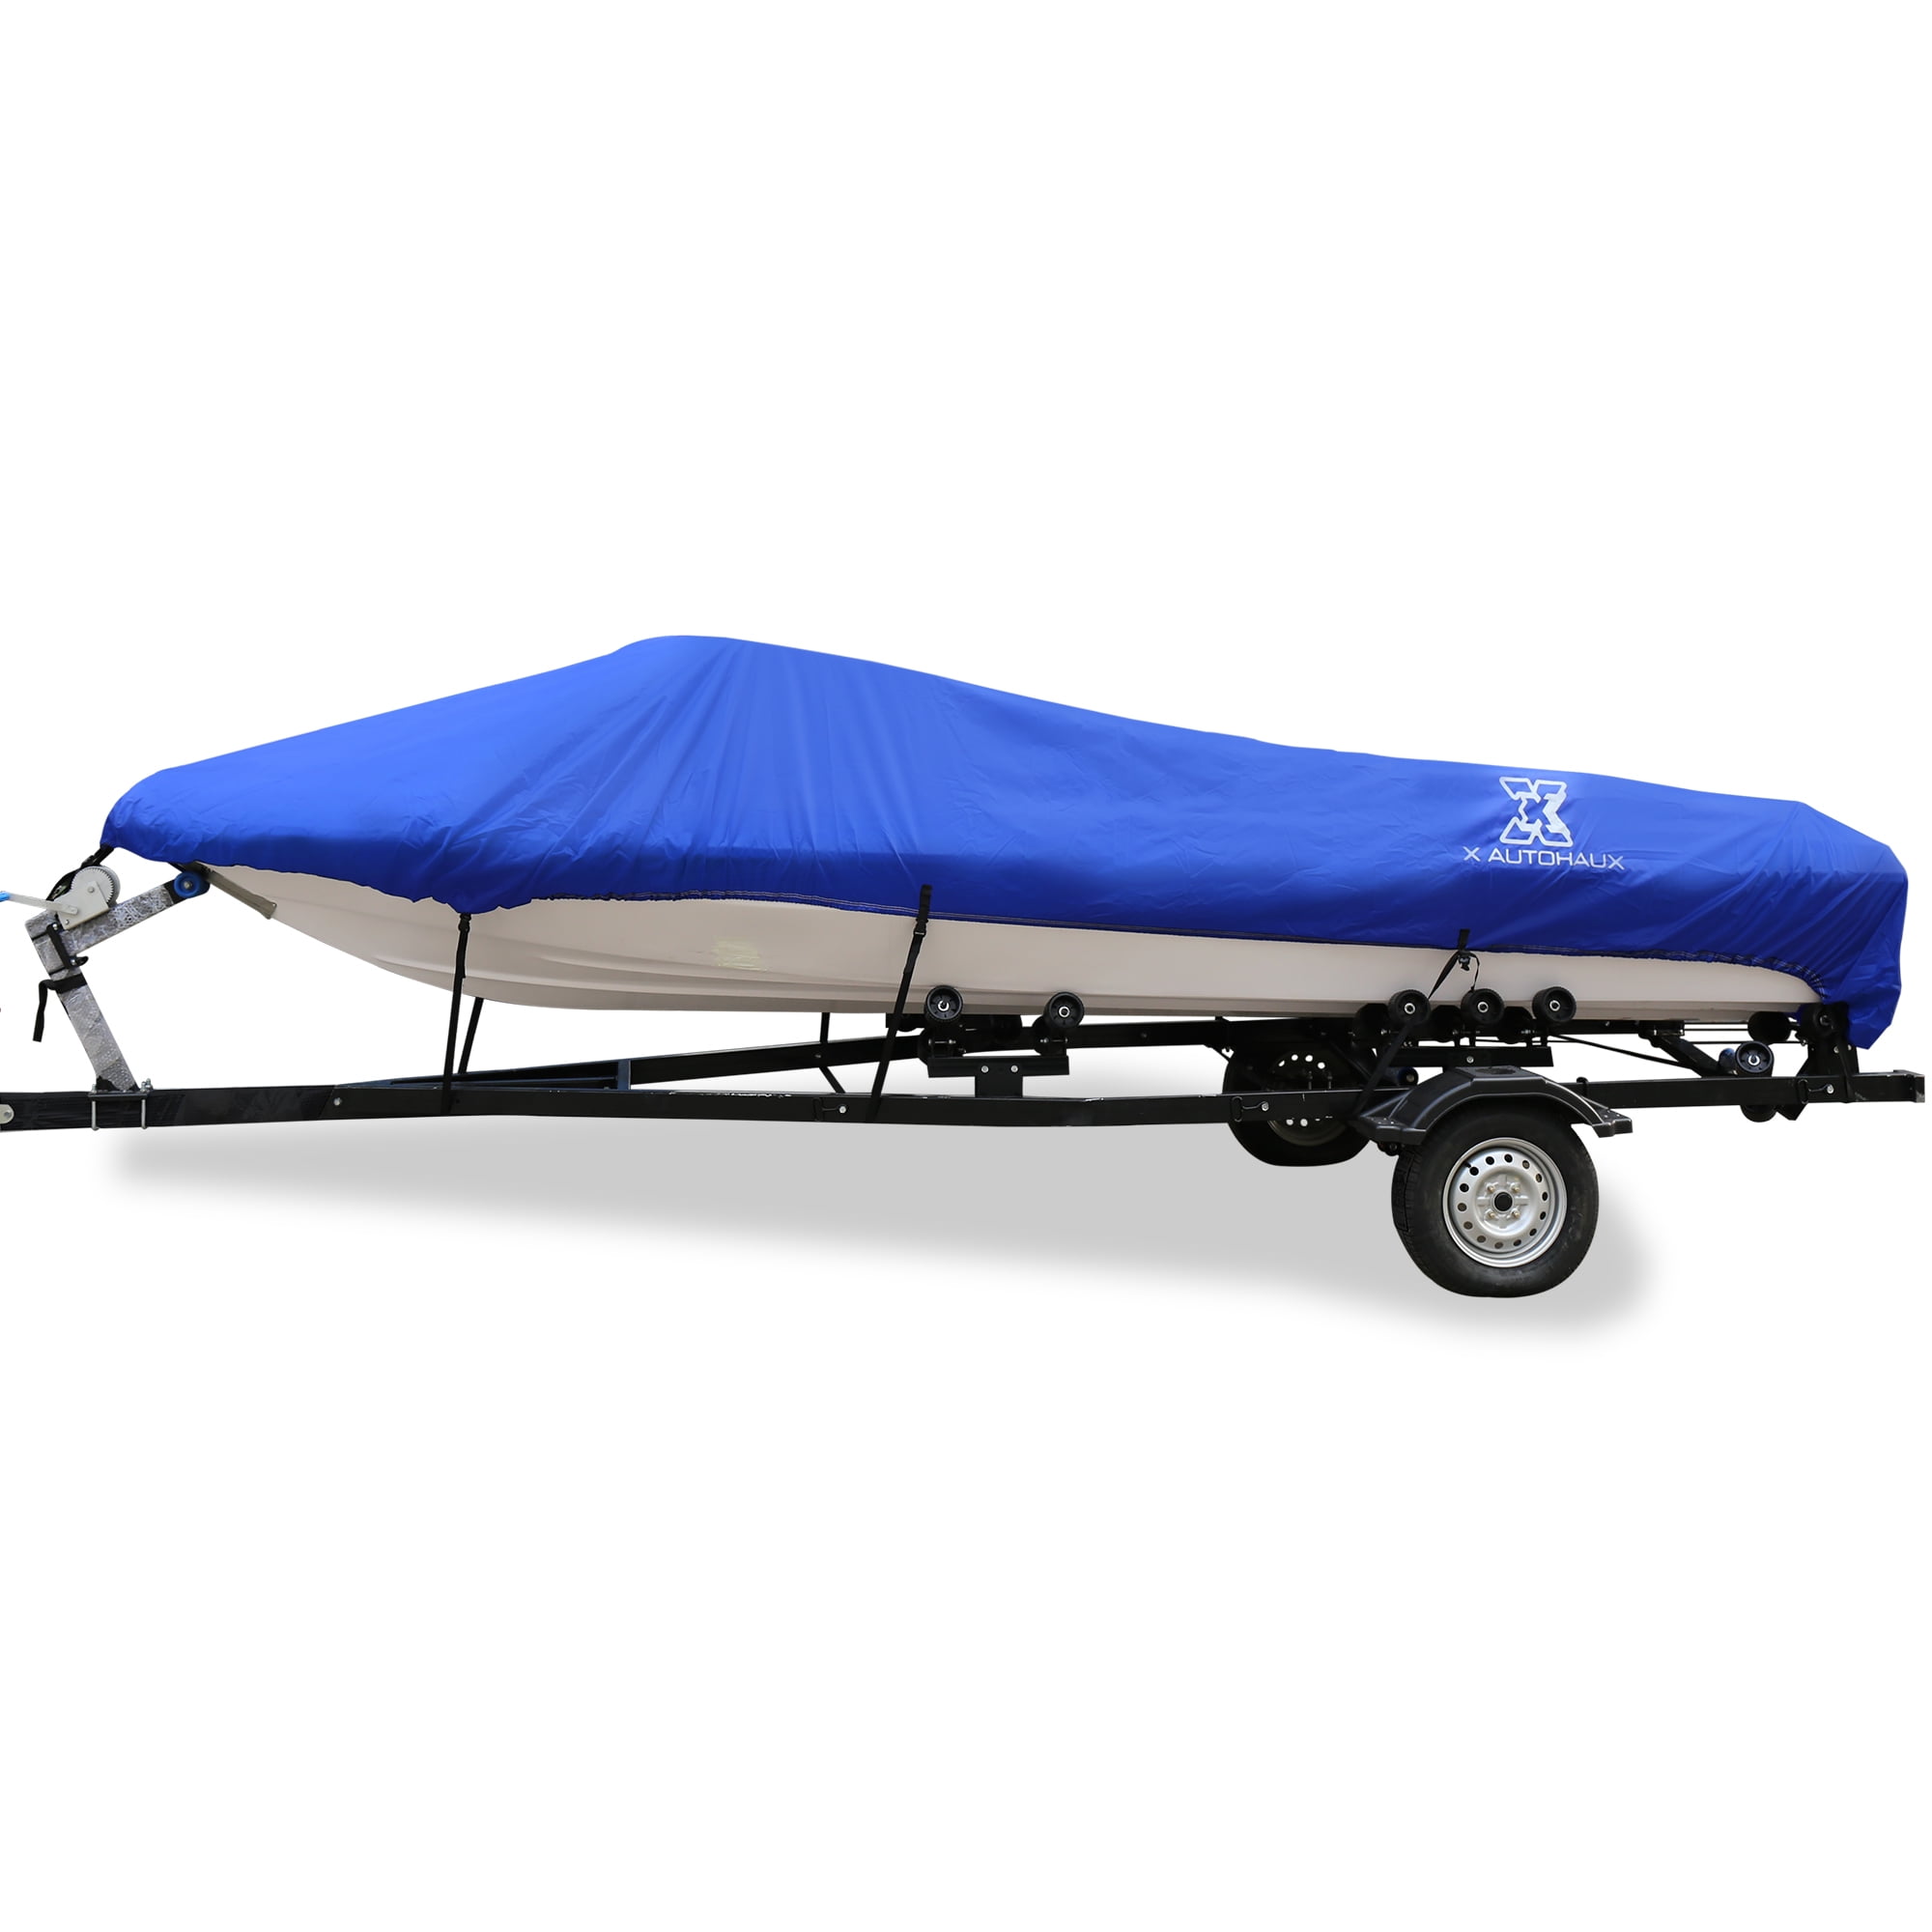 1618ft 94" 300D Polyester Boat Cover Waterproof Blue VHull Protector 590 x 290cm